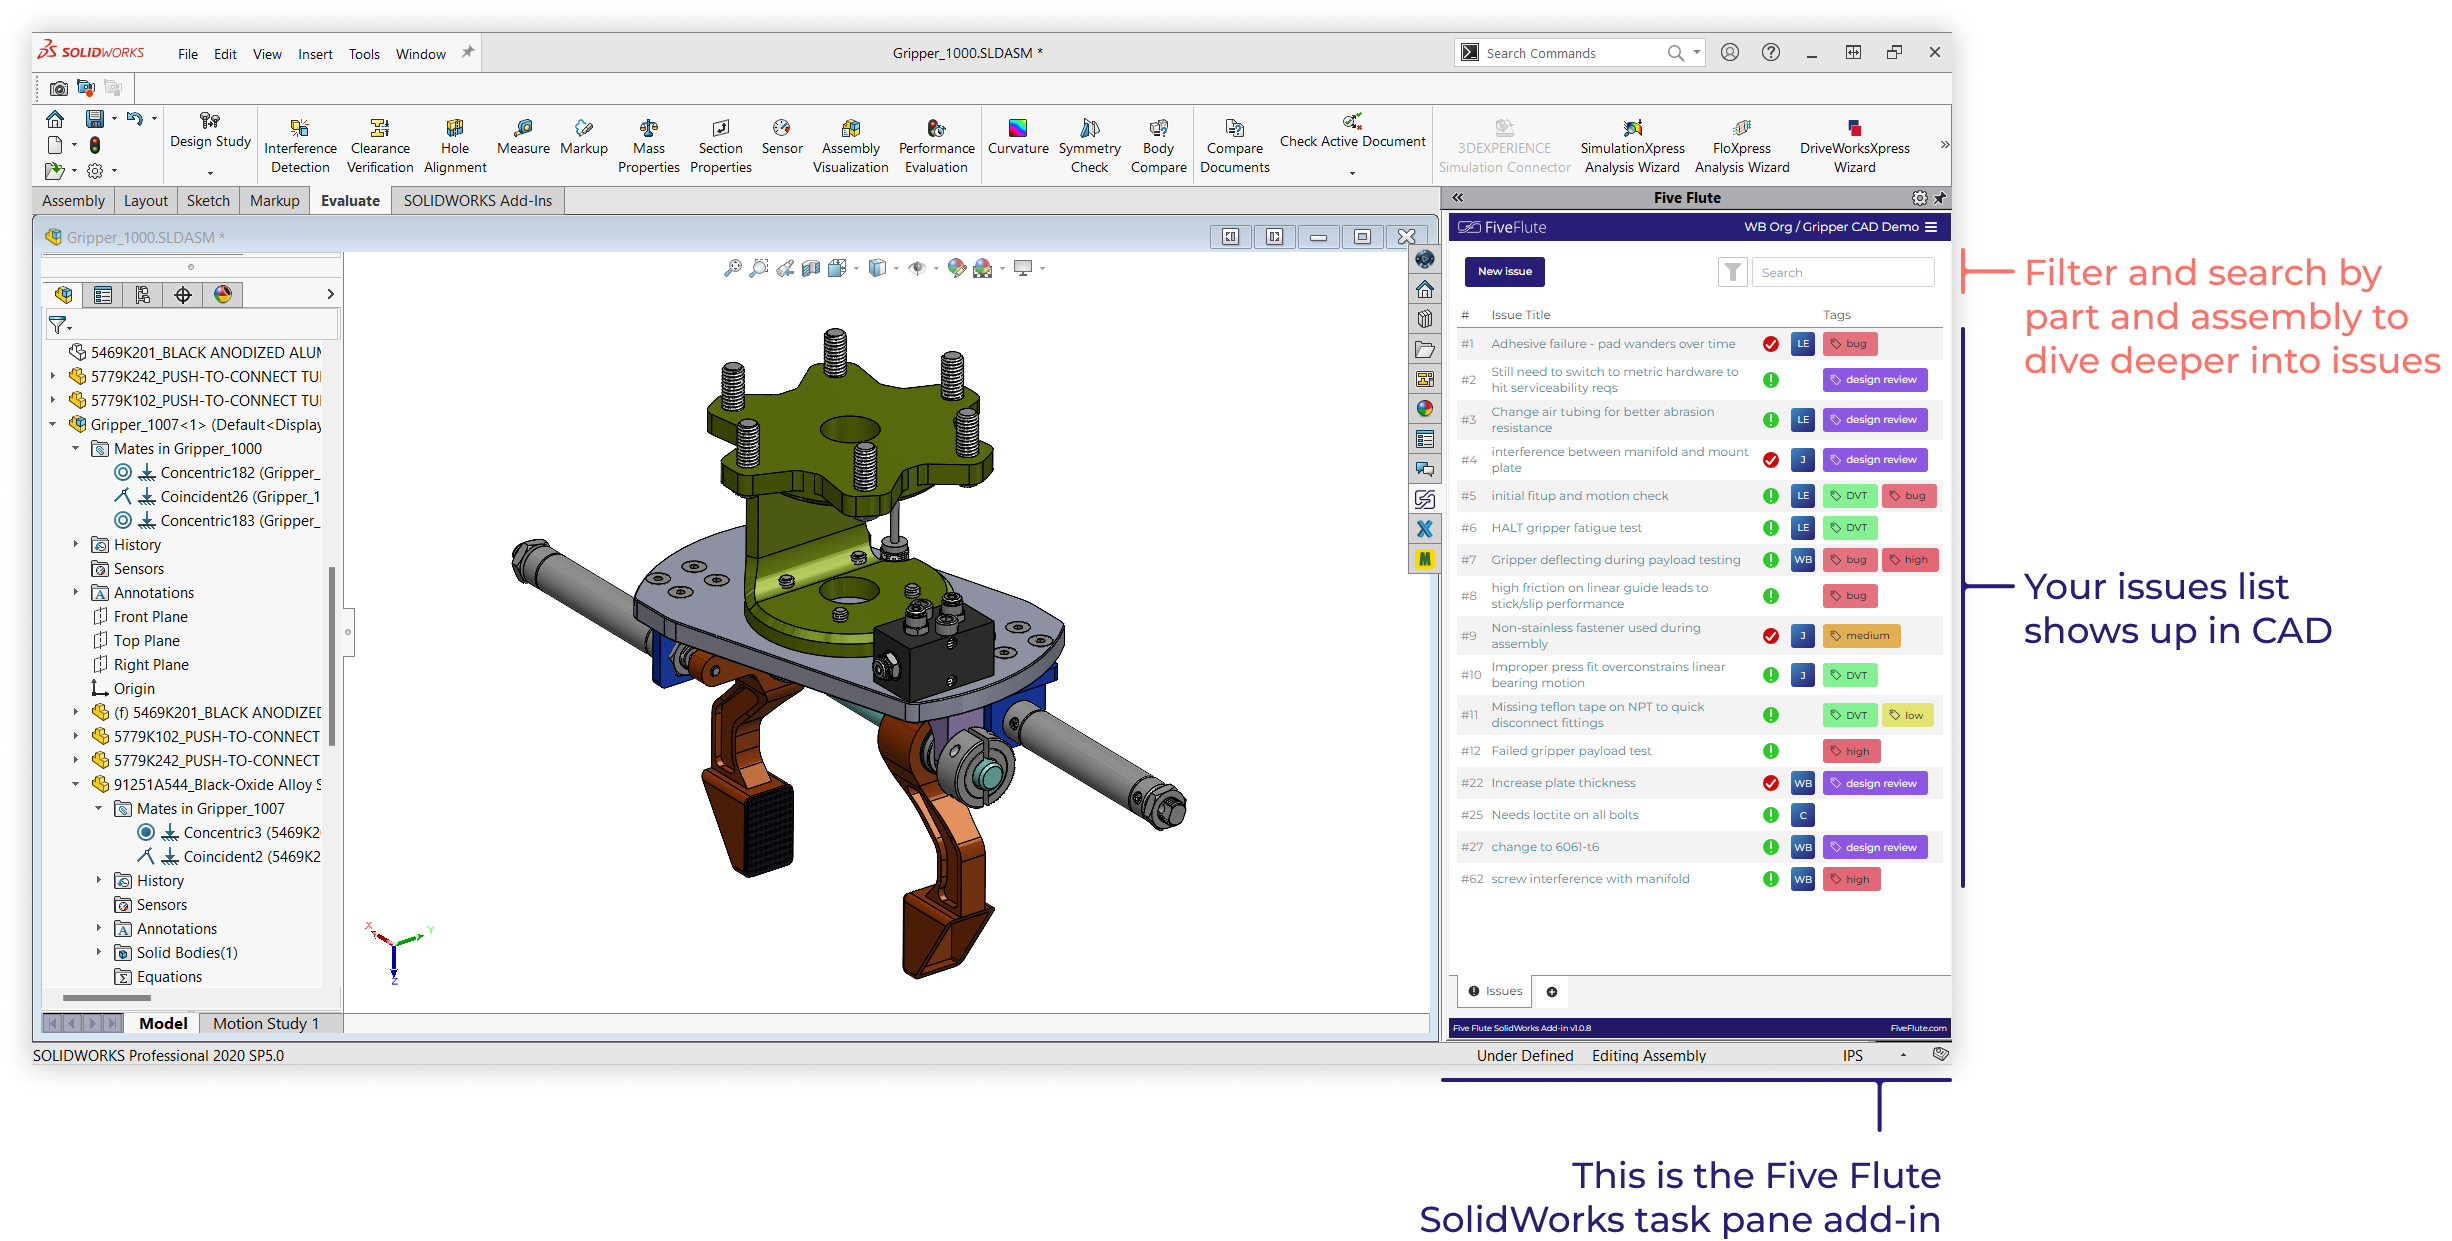 Five Flute's SolidWorks add-in lets engineers manage issues directly in SolidWorks.